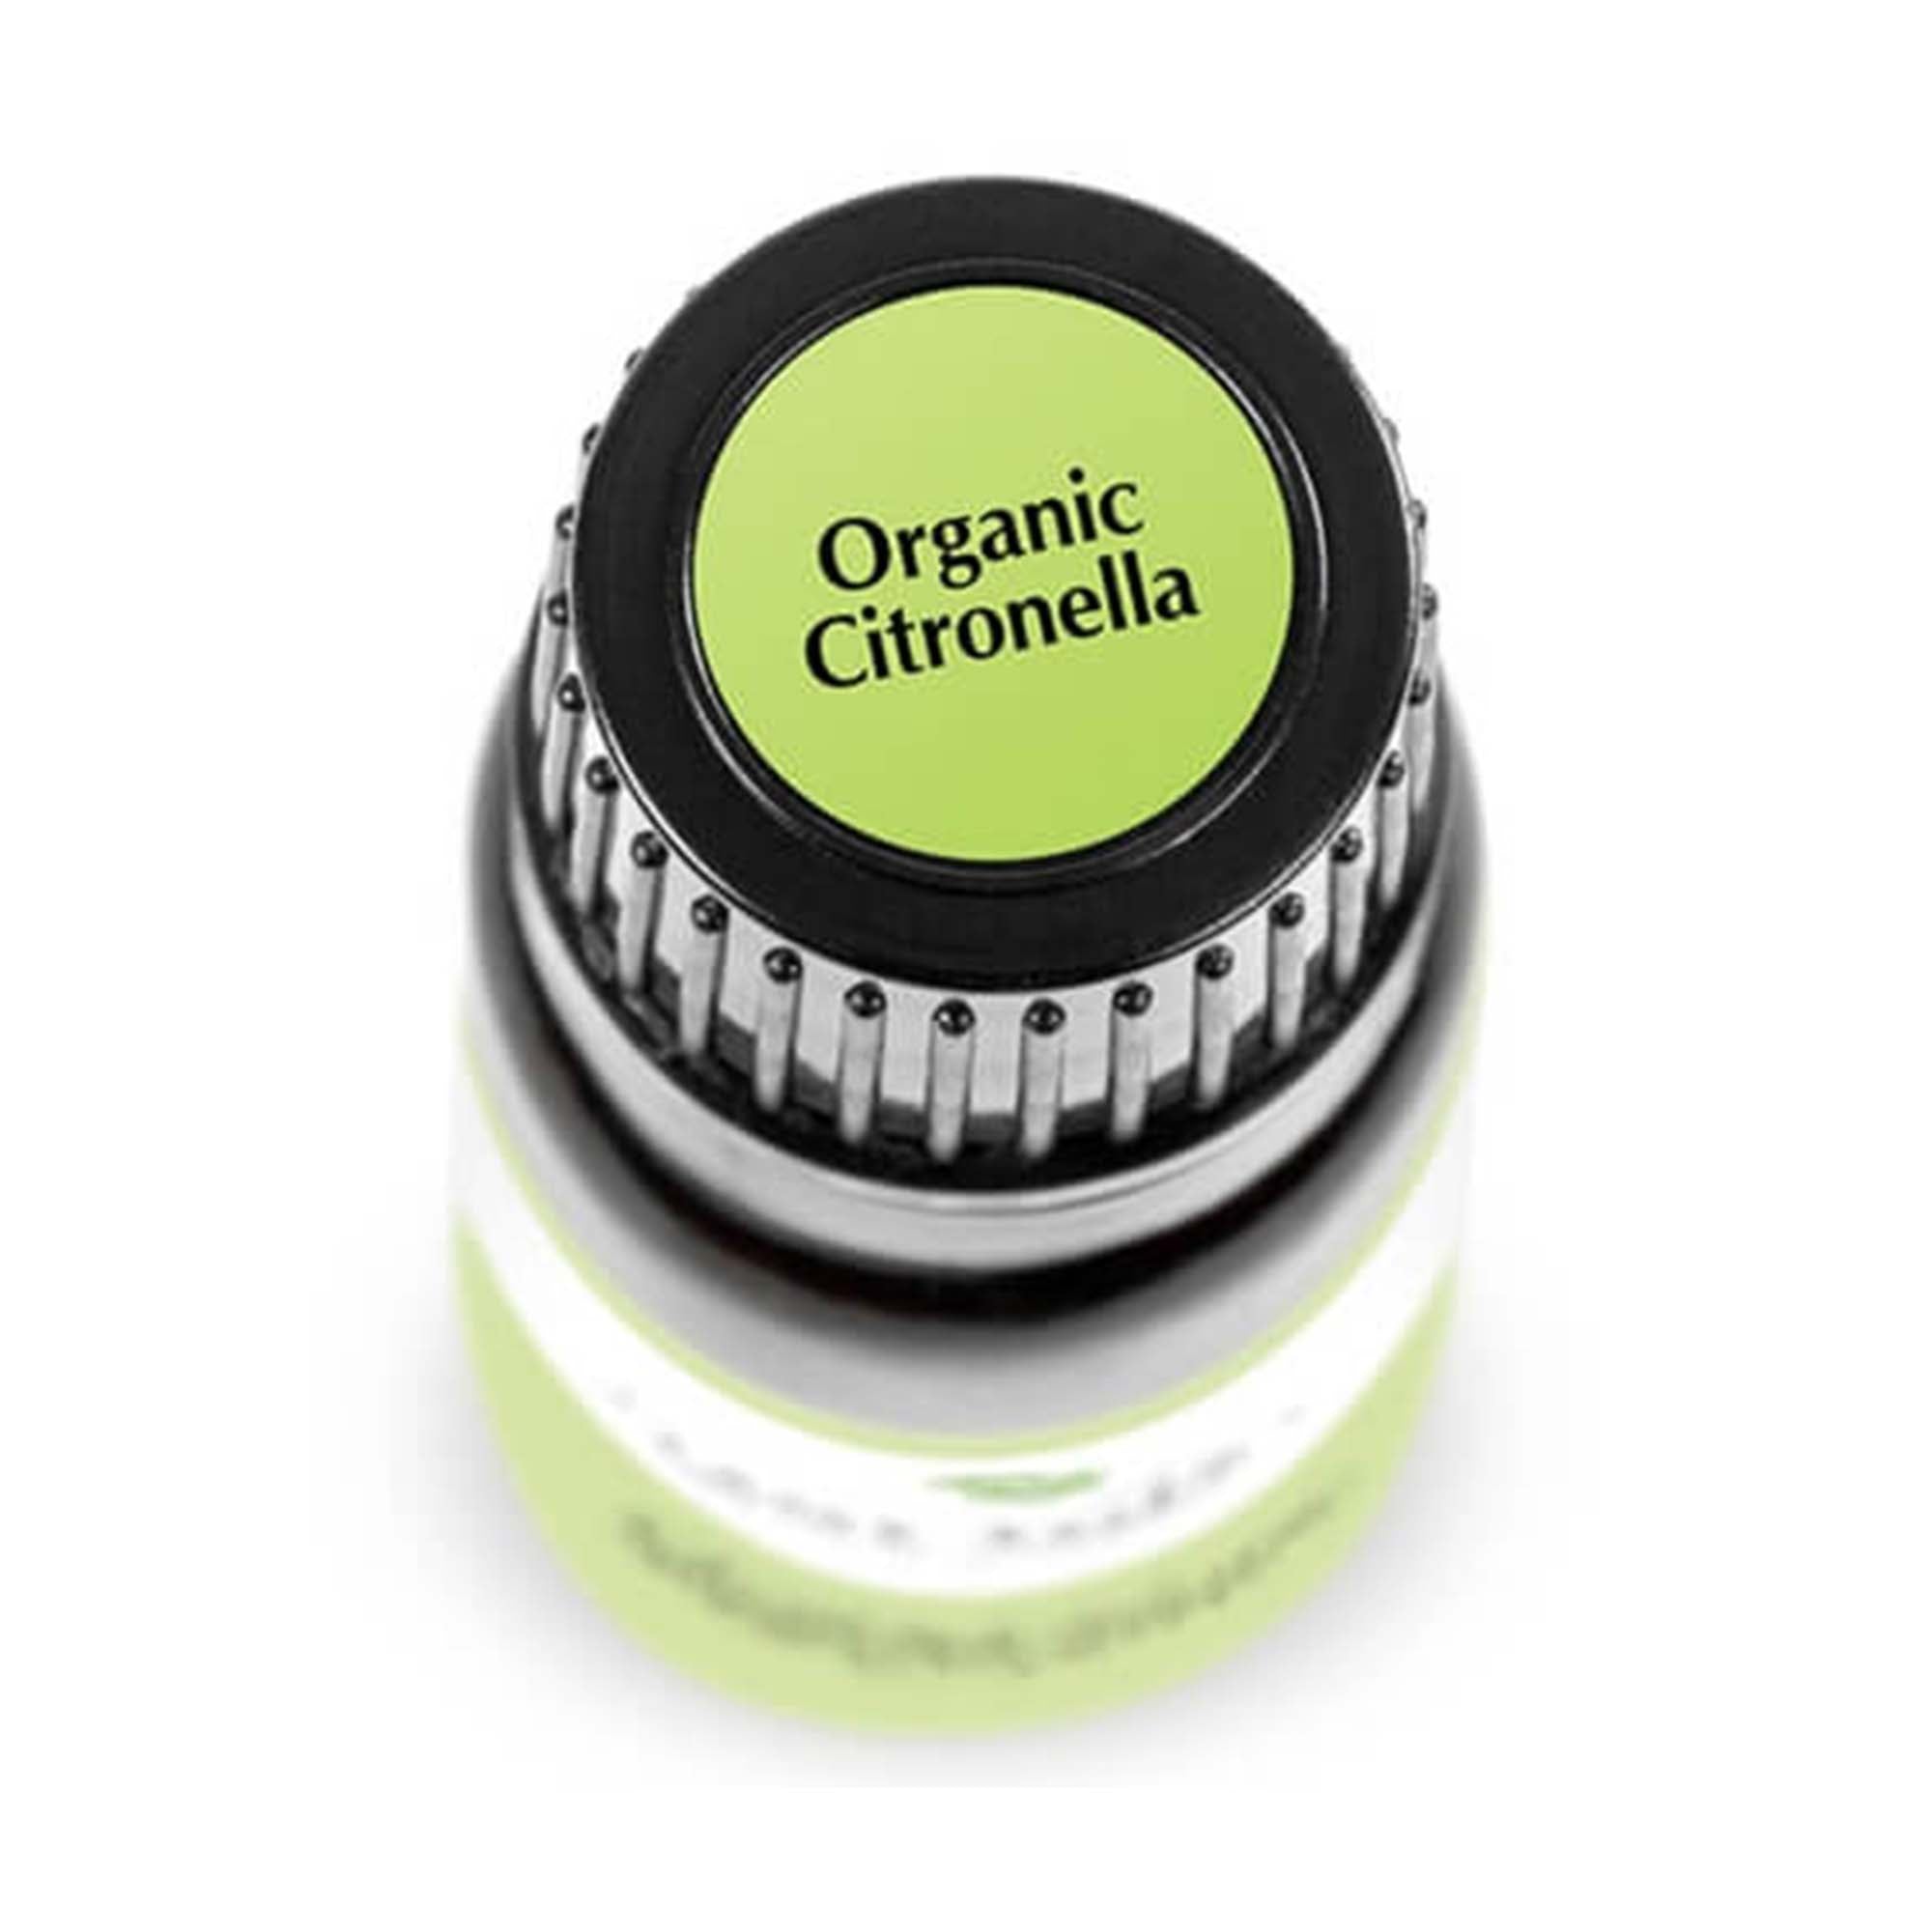 birds eye view of black bottle with green label. reads "organic citronella" 10 ml